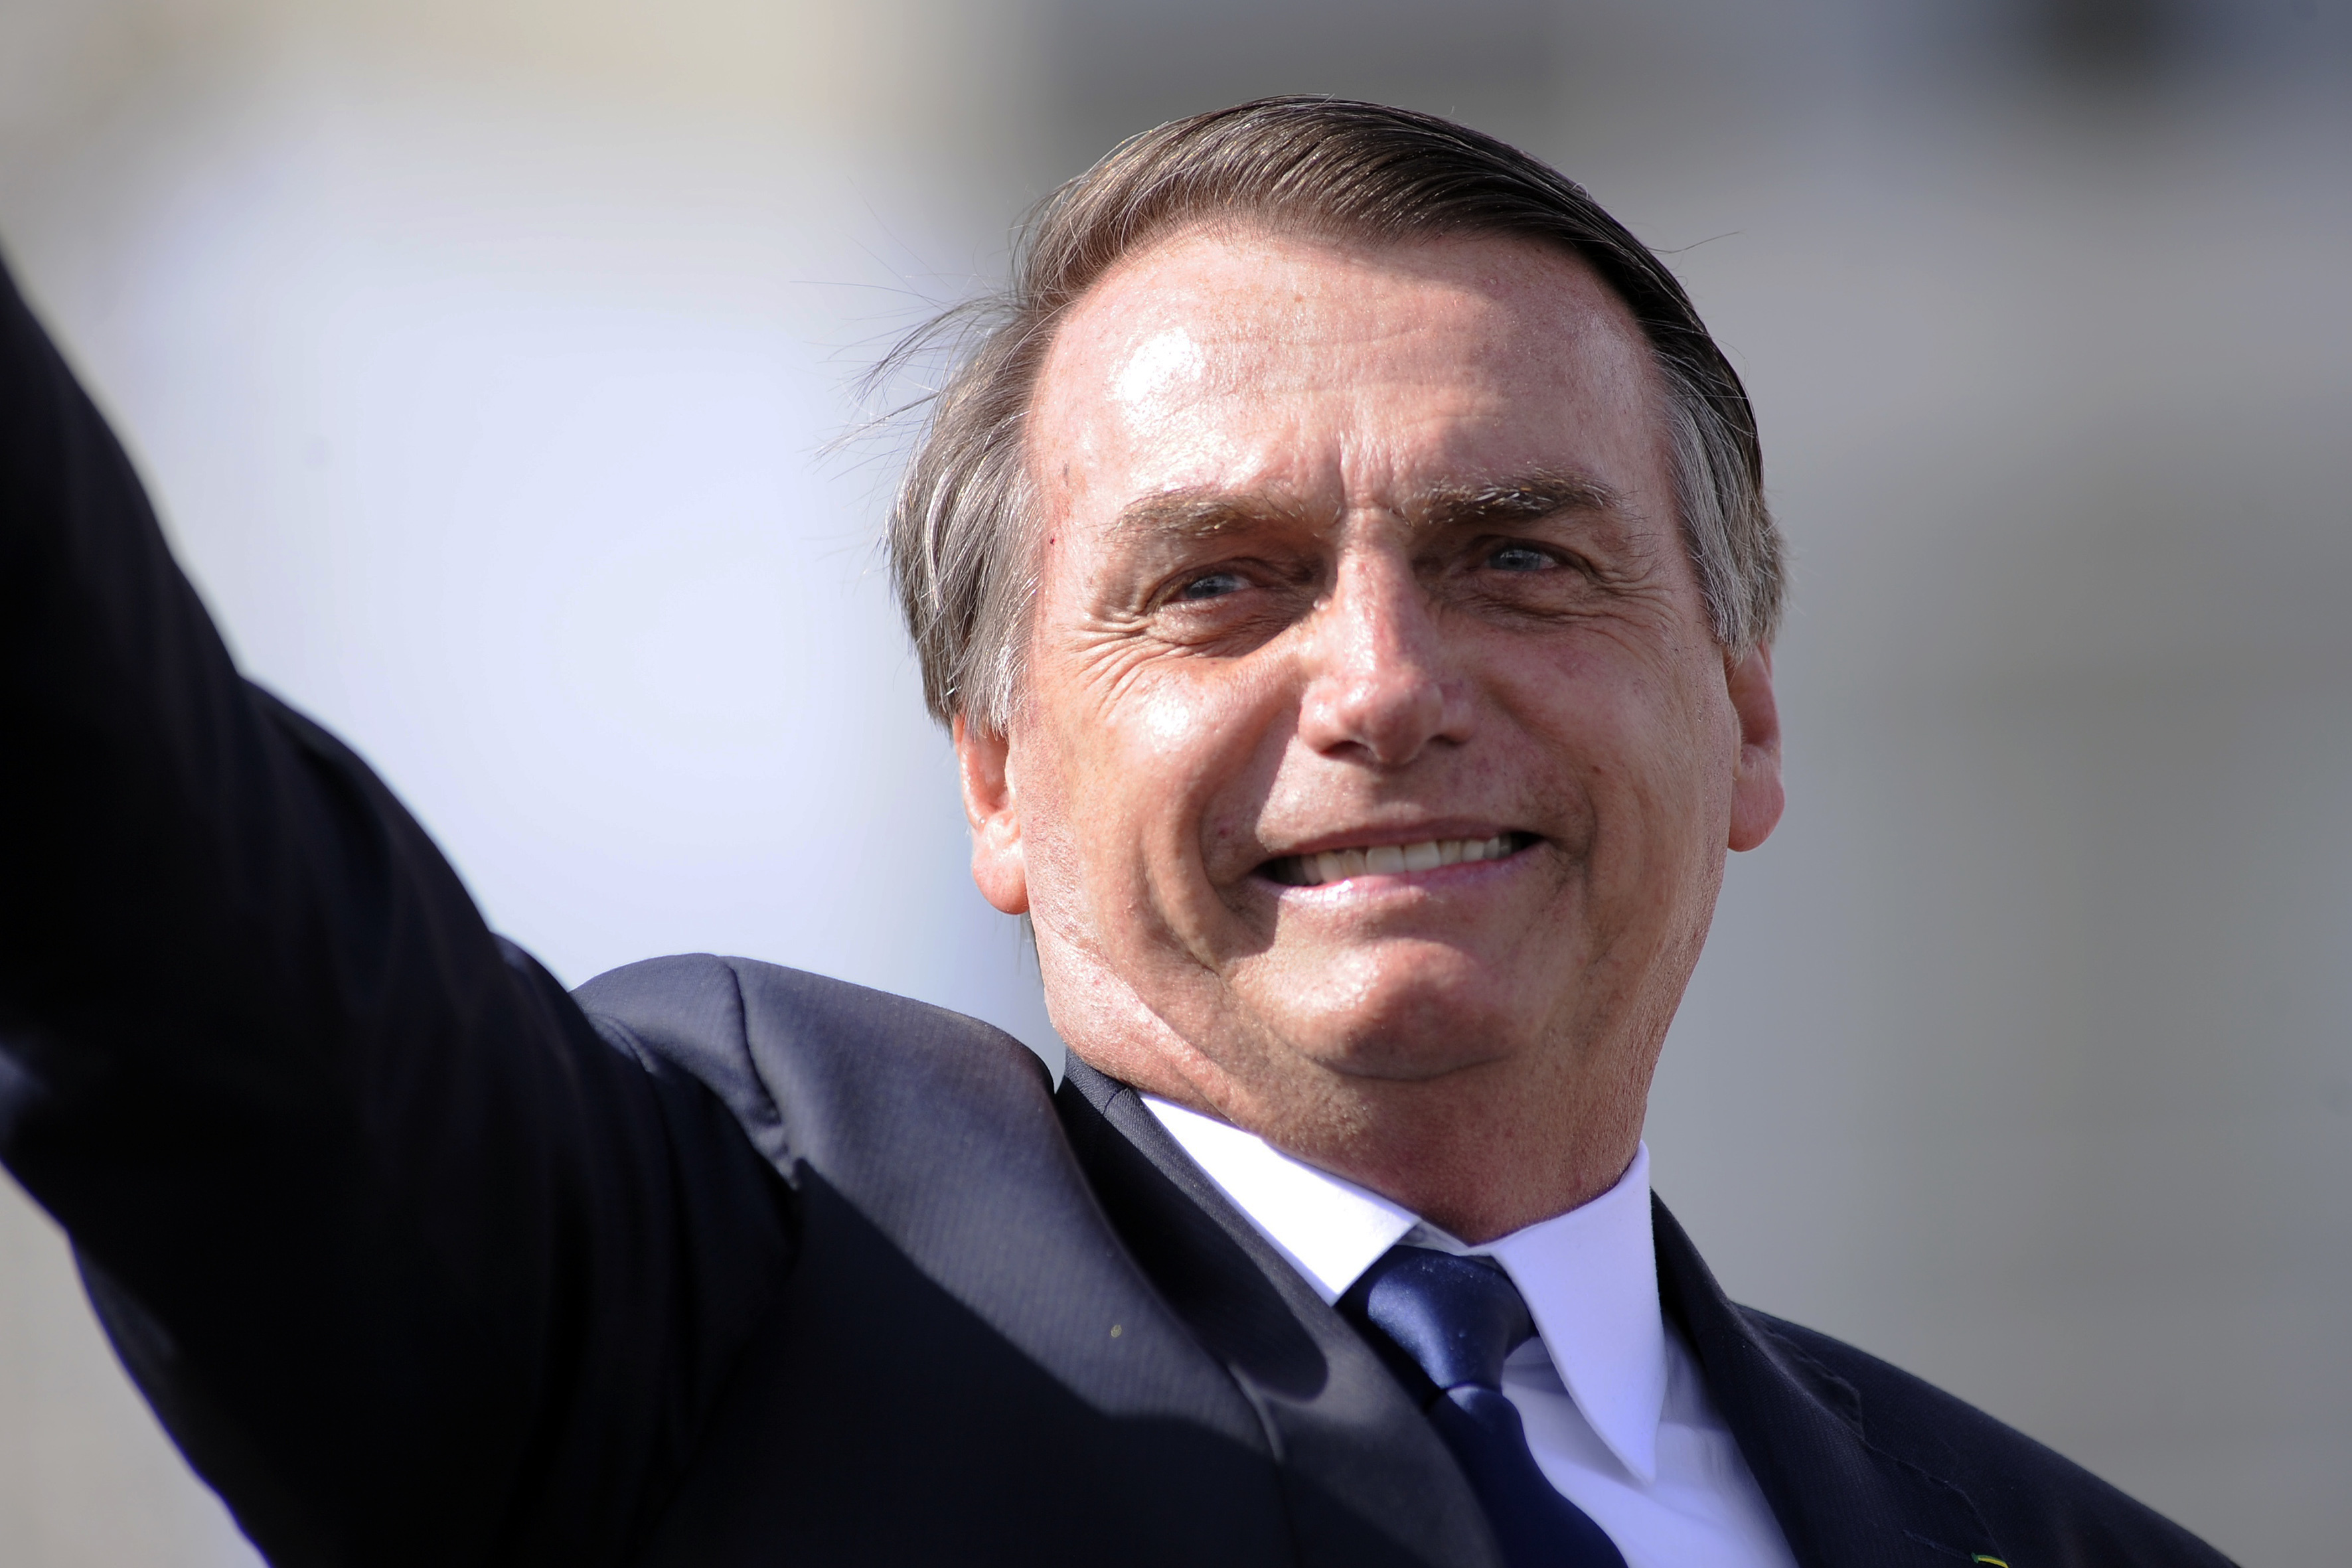 01 January 2019, Brazil, Brasilia: Brazil's President Jair Bolsonaro waves as he drives through the capital Brasilia in an open Rolls Royce. The ultra-right ex-military Jair Bolsonaro has been sworn in as the new president of Brazil. The 63-year-old took his oath of office in Congress on Tuesday. Photo by: Alan Morici/picture-alliance/dpa/AP Images